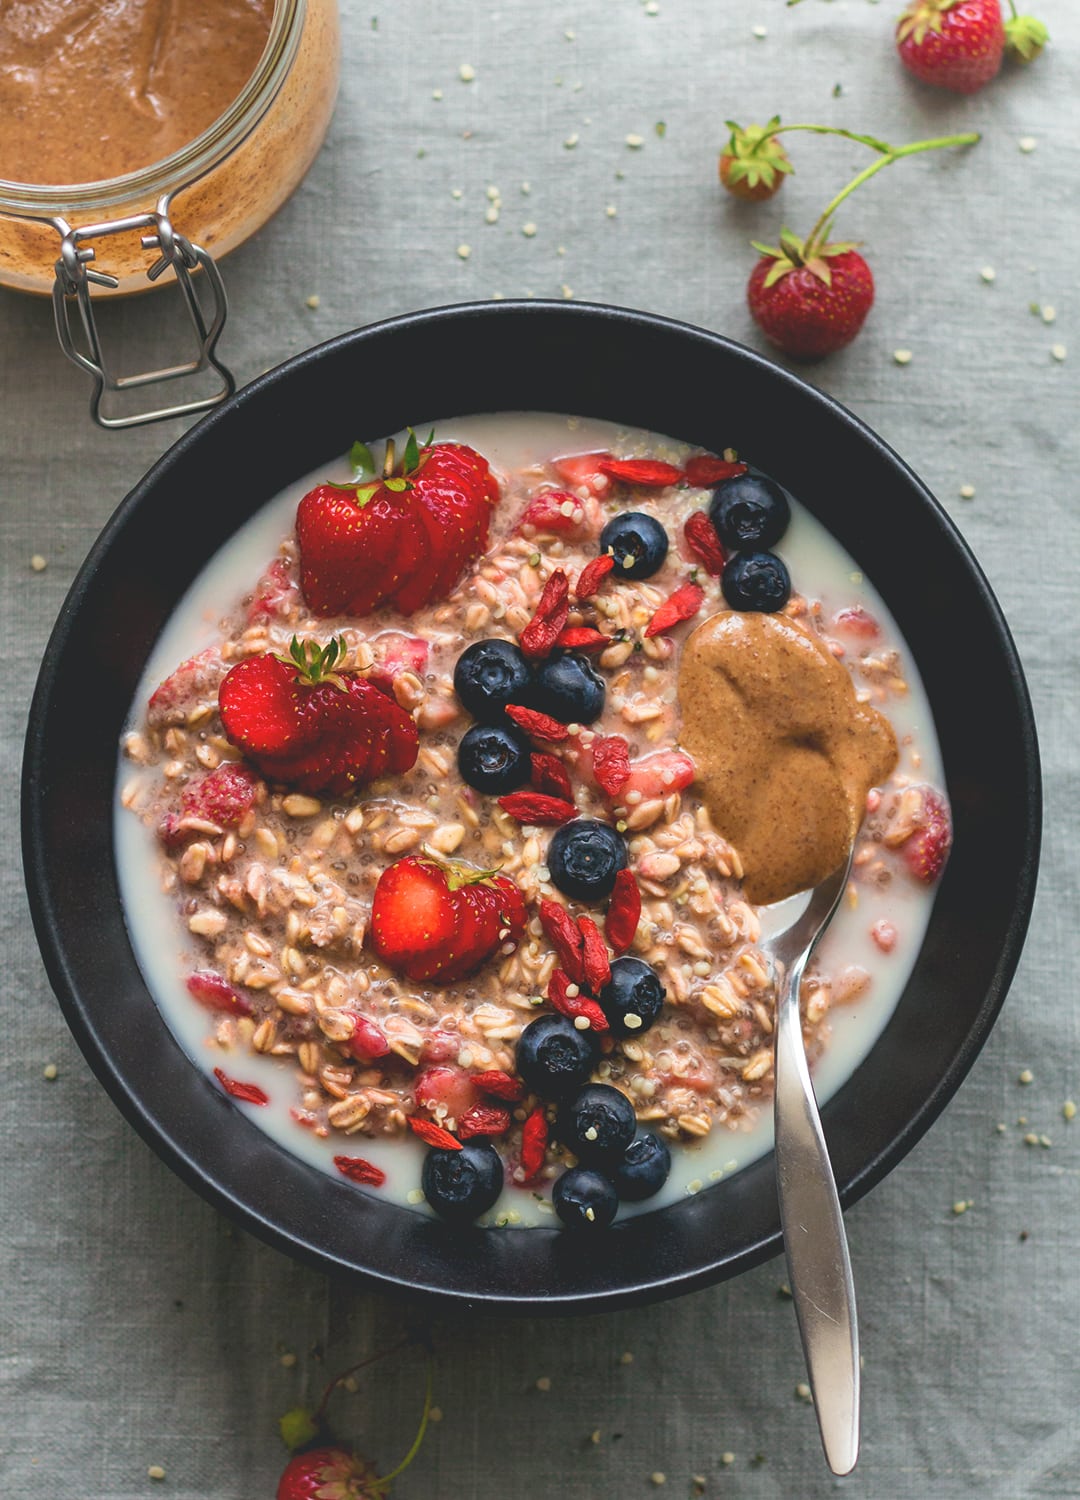 Strawberry Overnight Oats - delicious breakfast for busy days. I love this recipe, it's easy, healthy, and filling. Oats, strawberries, chia seeds, milk, and sweetener - so easy! | thehealthfulideas.com